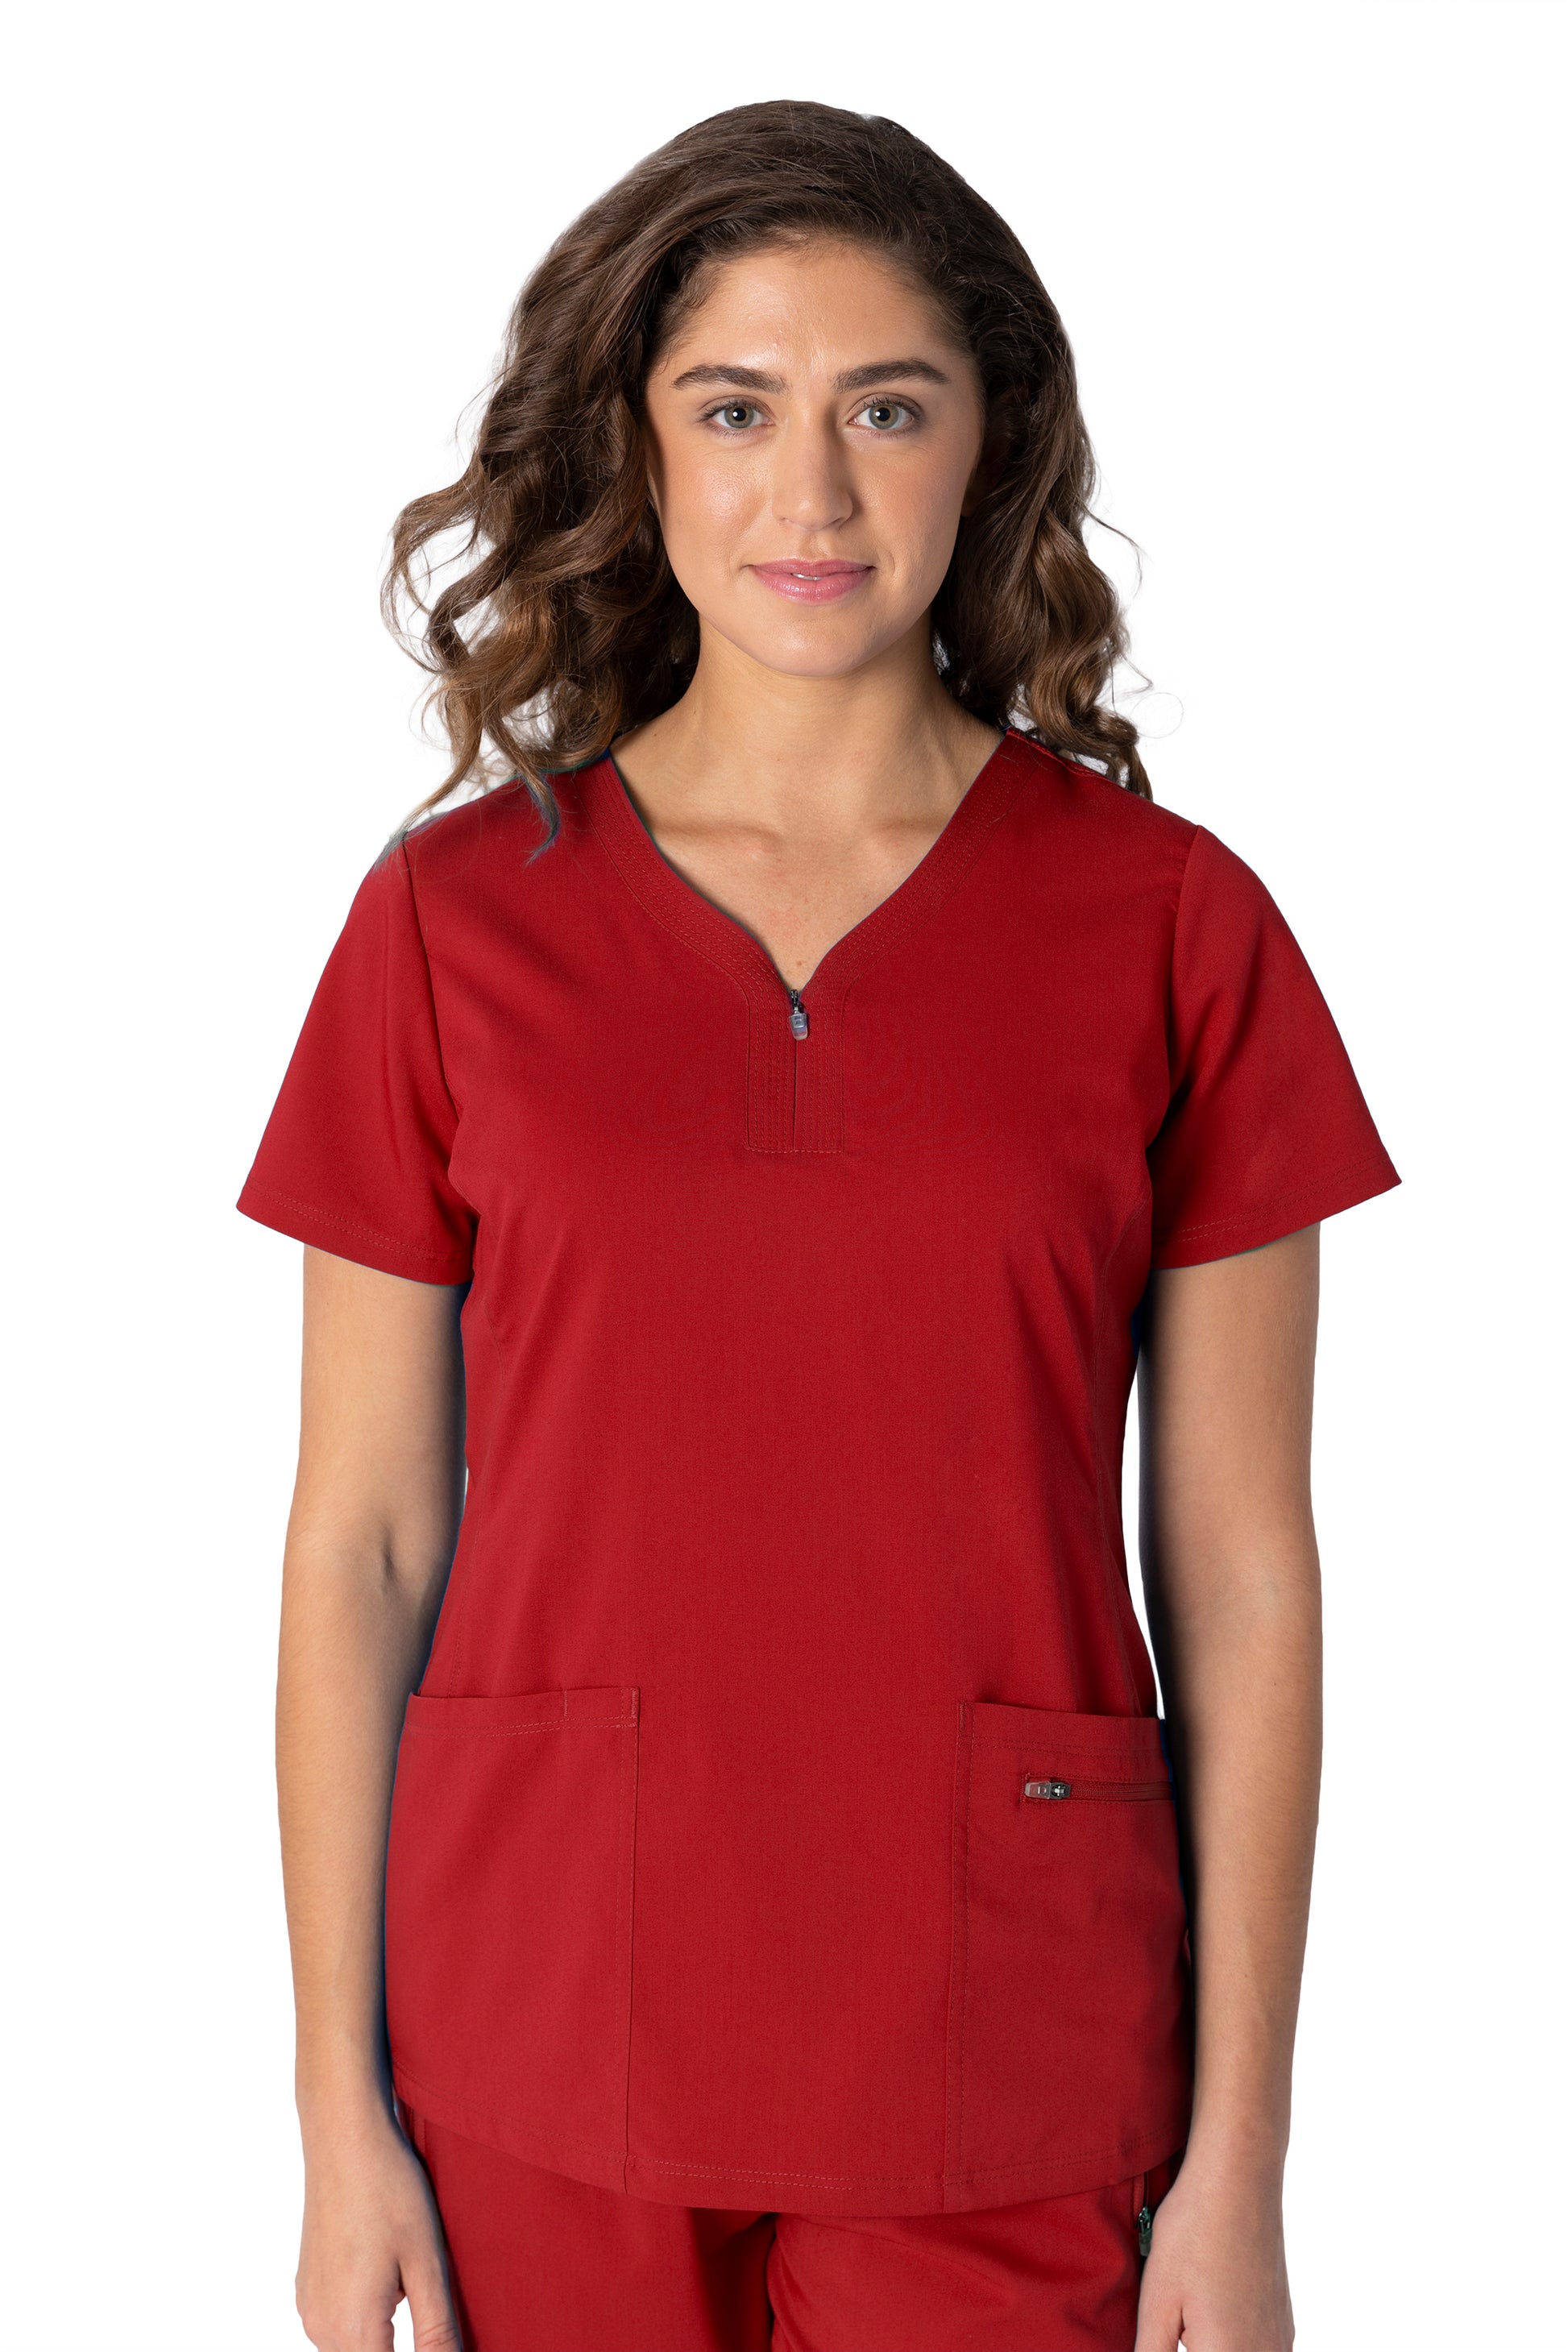 Healing Hands Purple Label Jeni Scrub Top in Red at Parker's Clothing and Shoes.